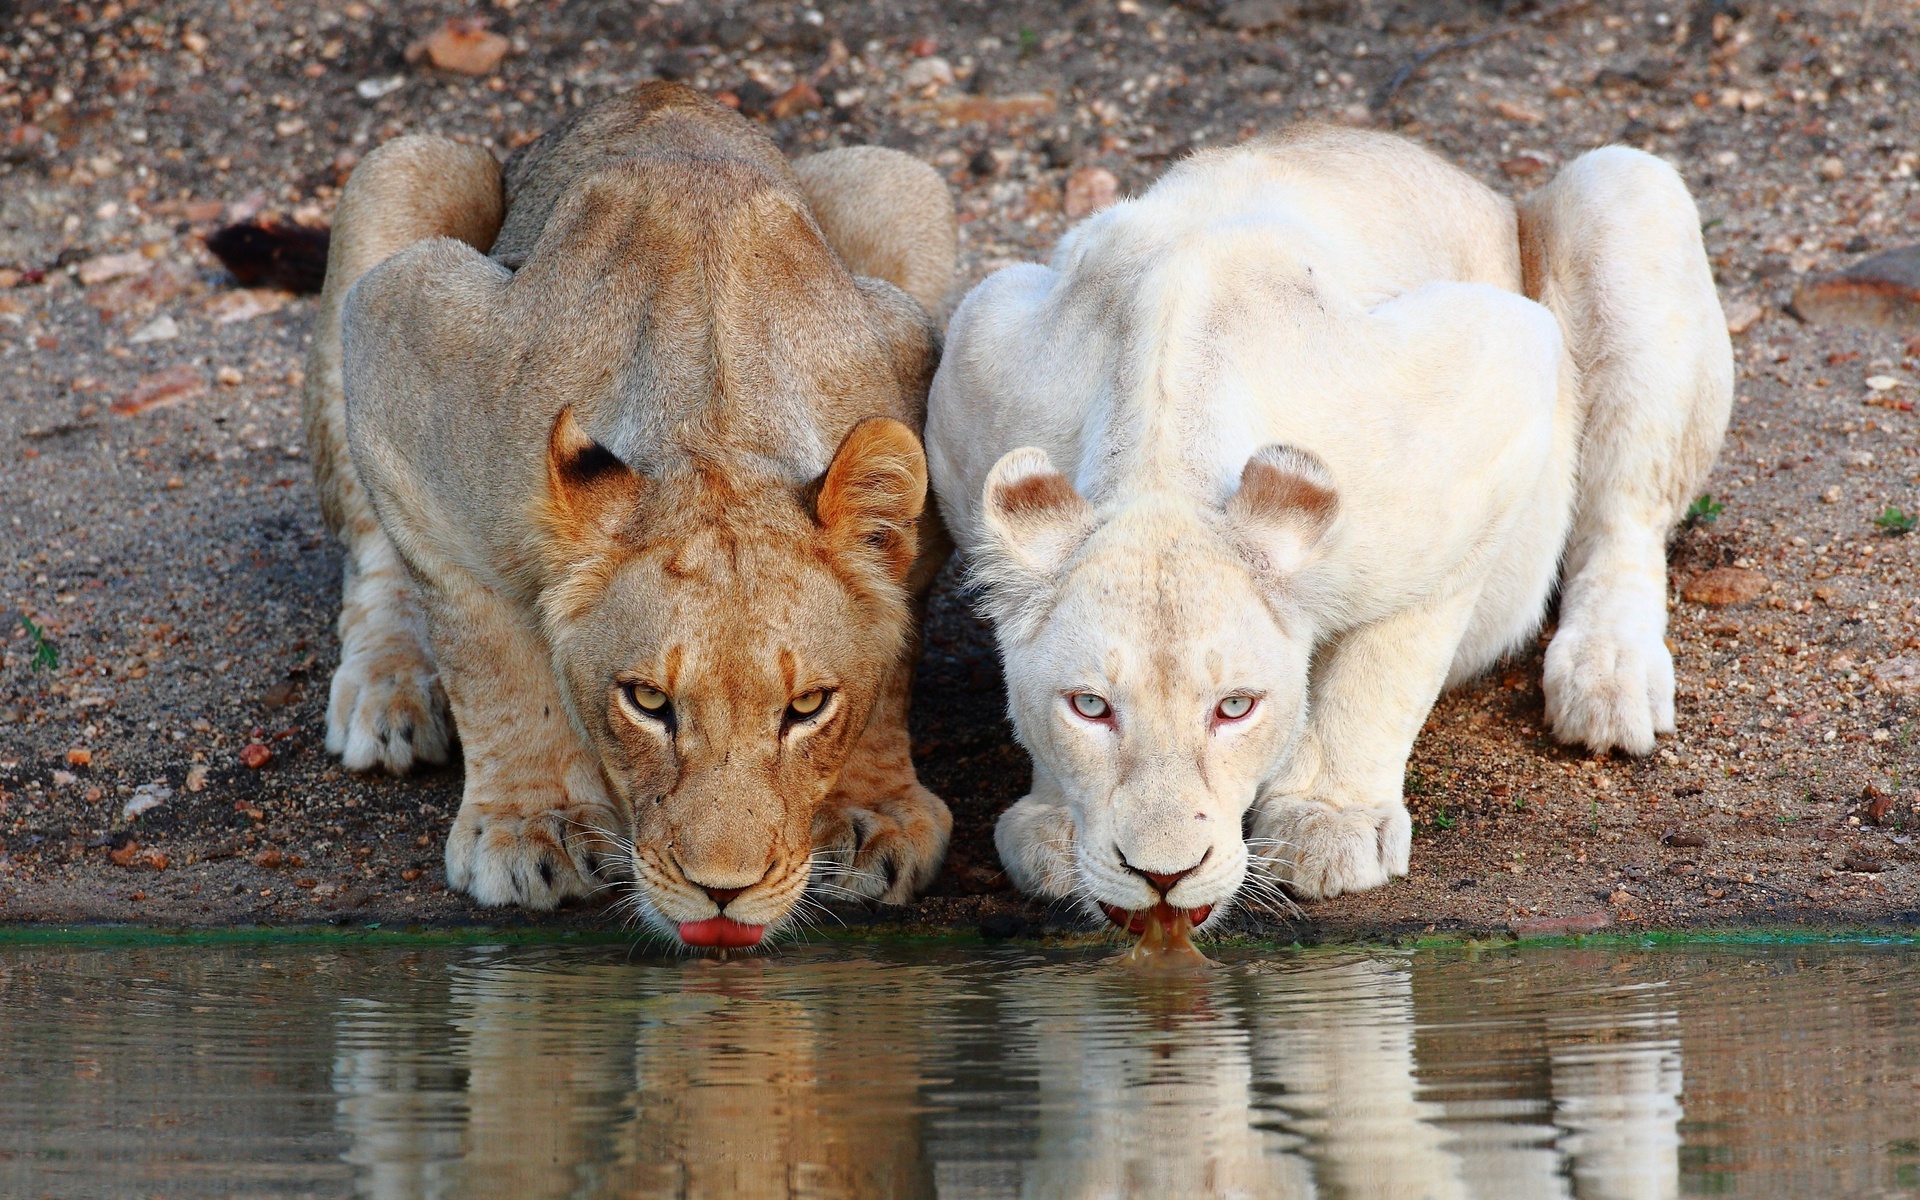 animals, Cats, Predator, Lions, Contrast, Albino, Fur, Whiskers, Face, Eyes, Wildlife, Africa, Lakes, Water, Pond Wallpaper